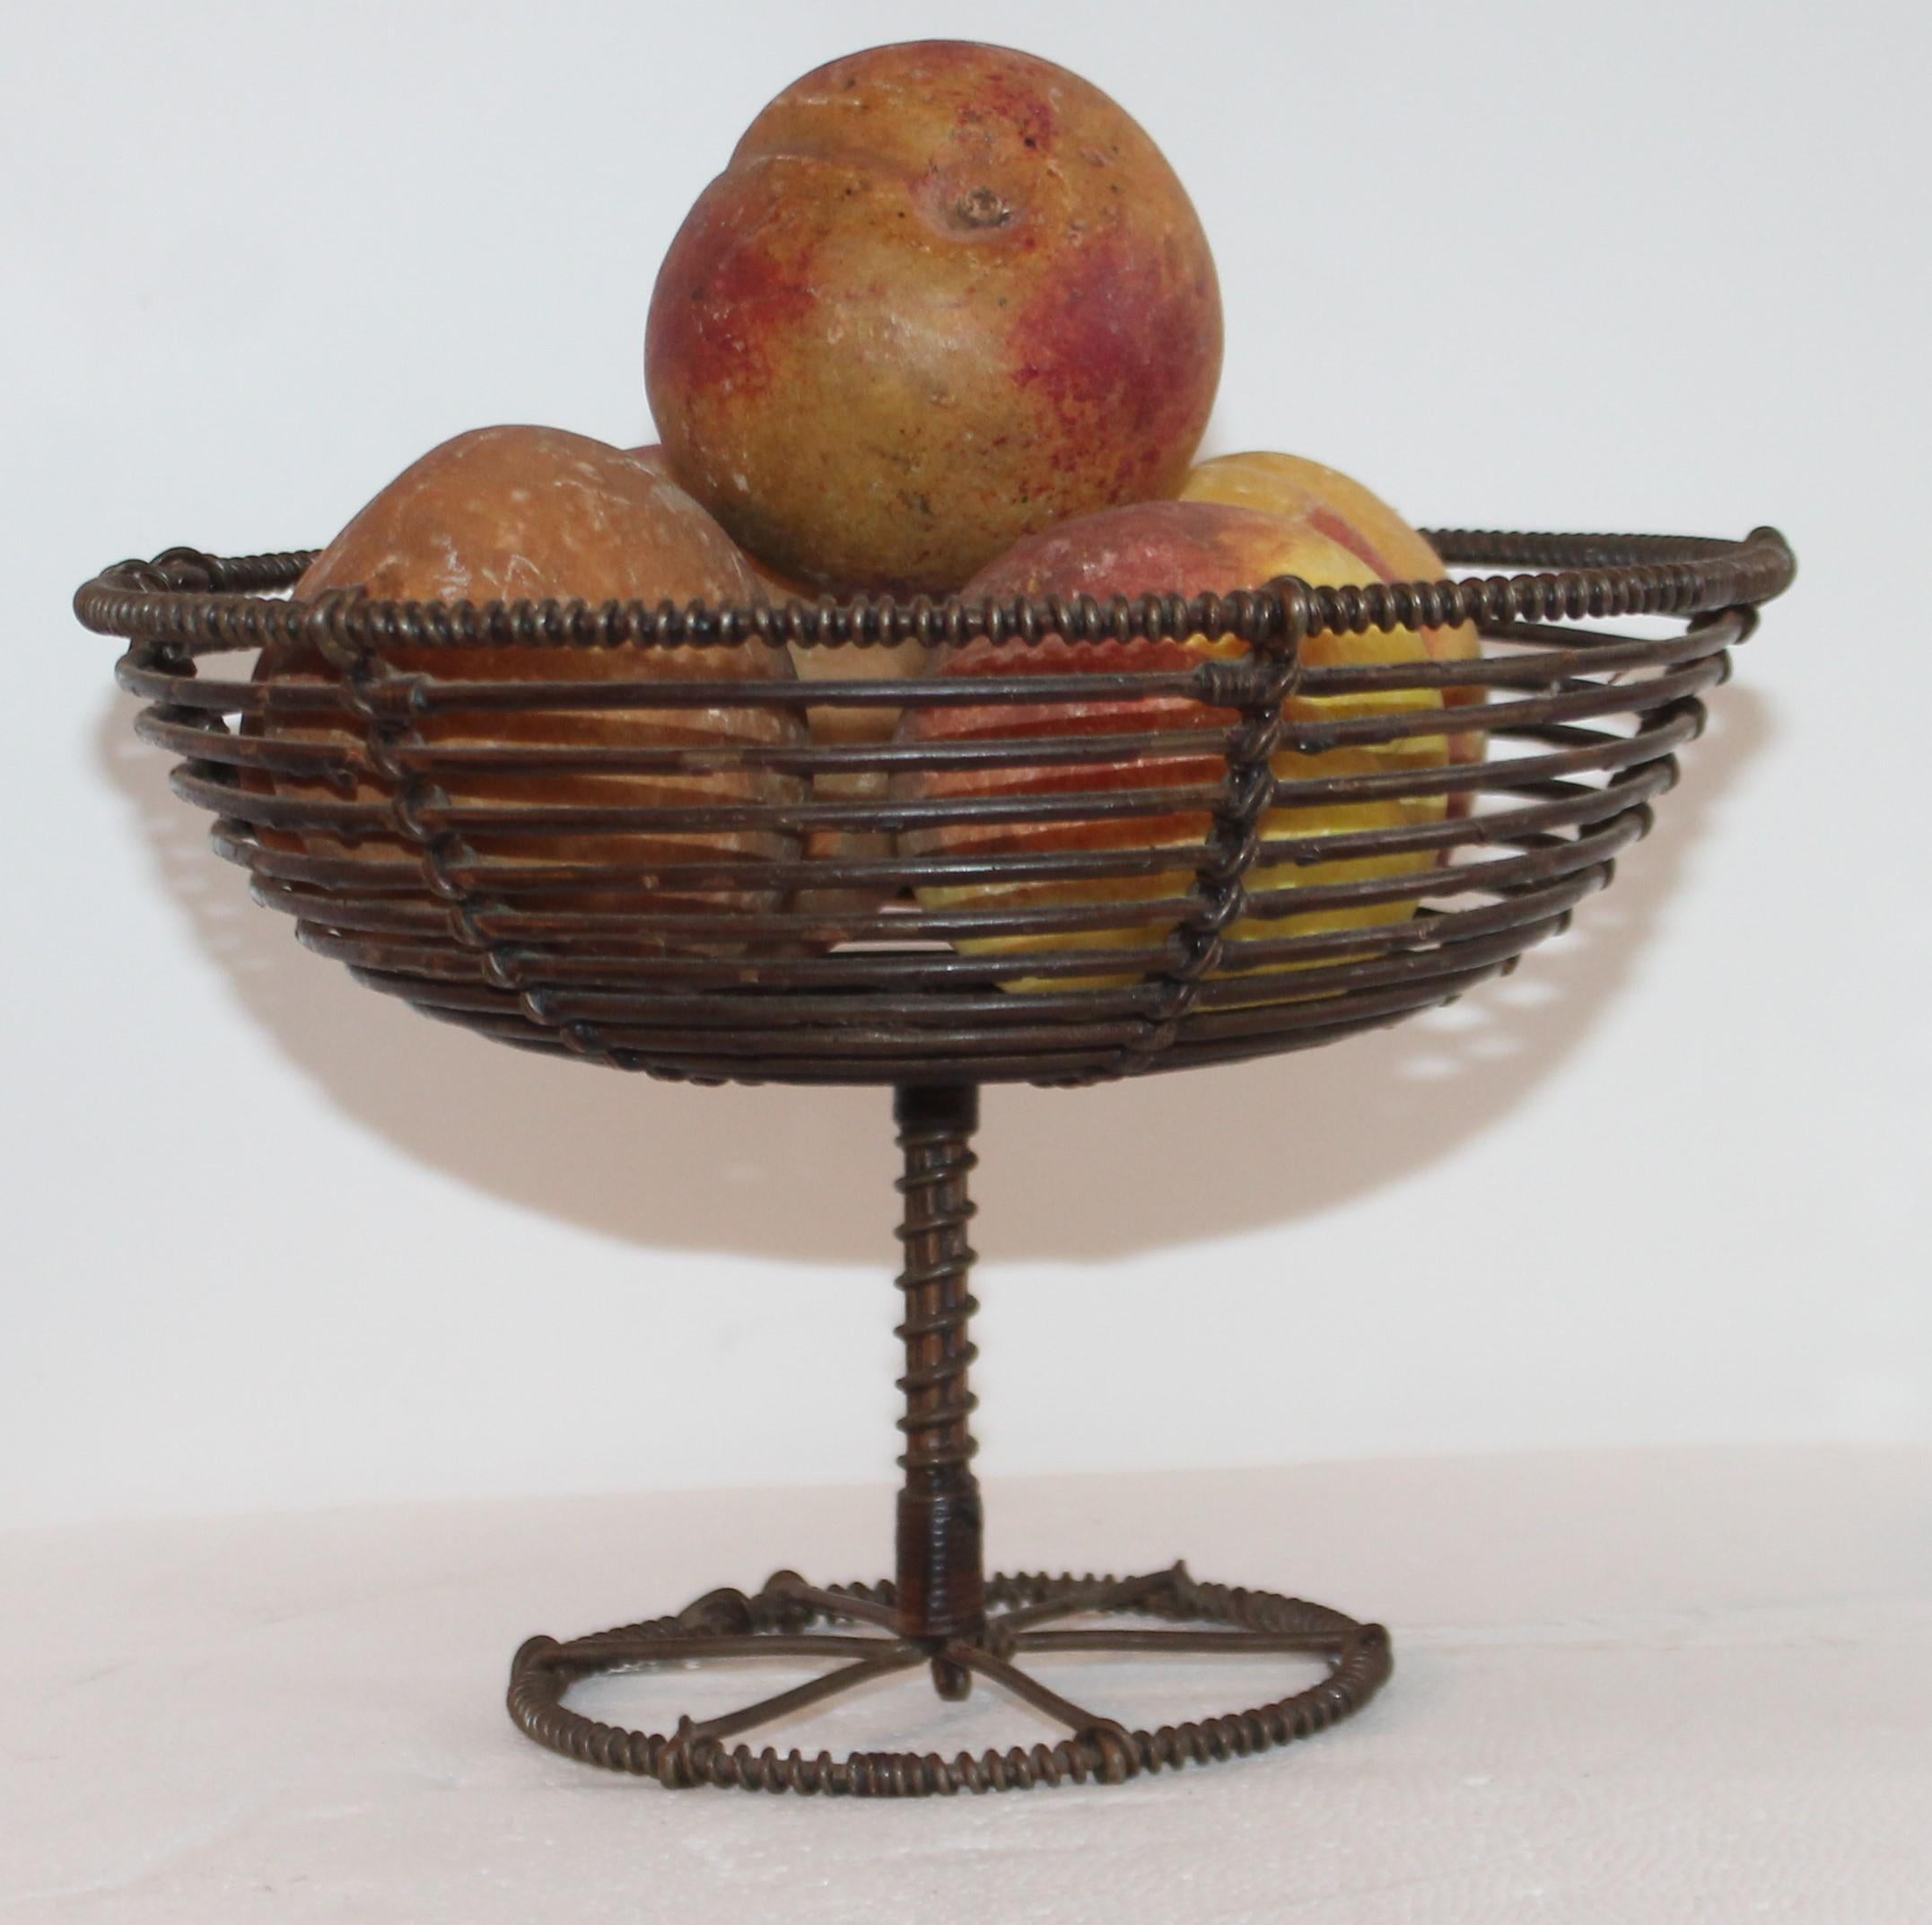 Collection of five pieces of alabaster peaches in a 19th century wire compote. The condition is very good. There are five peaches in the group.